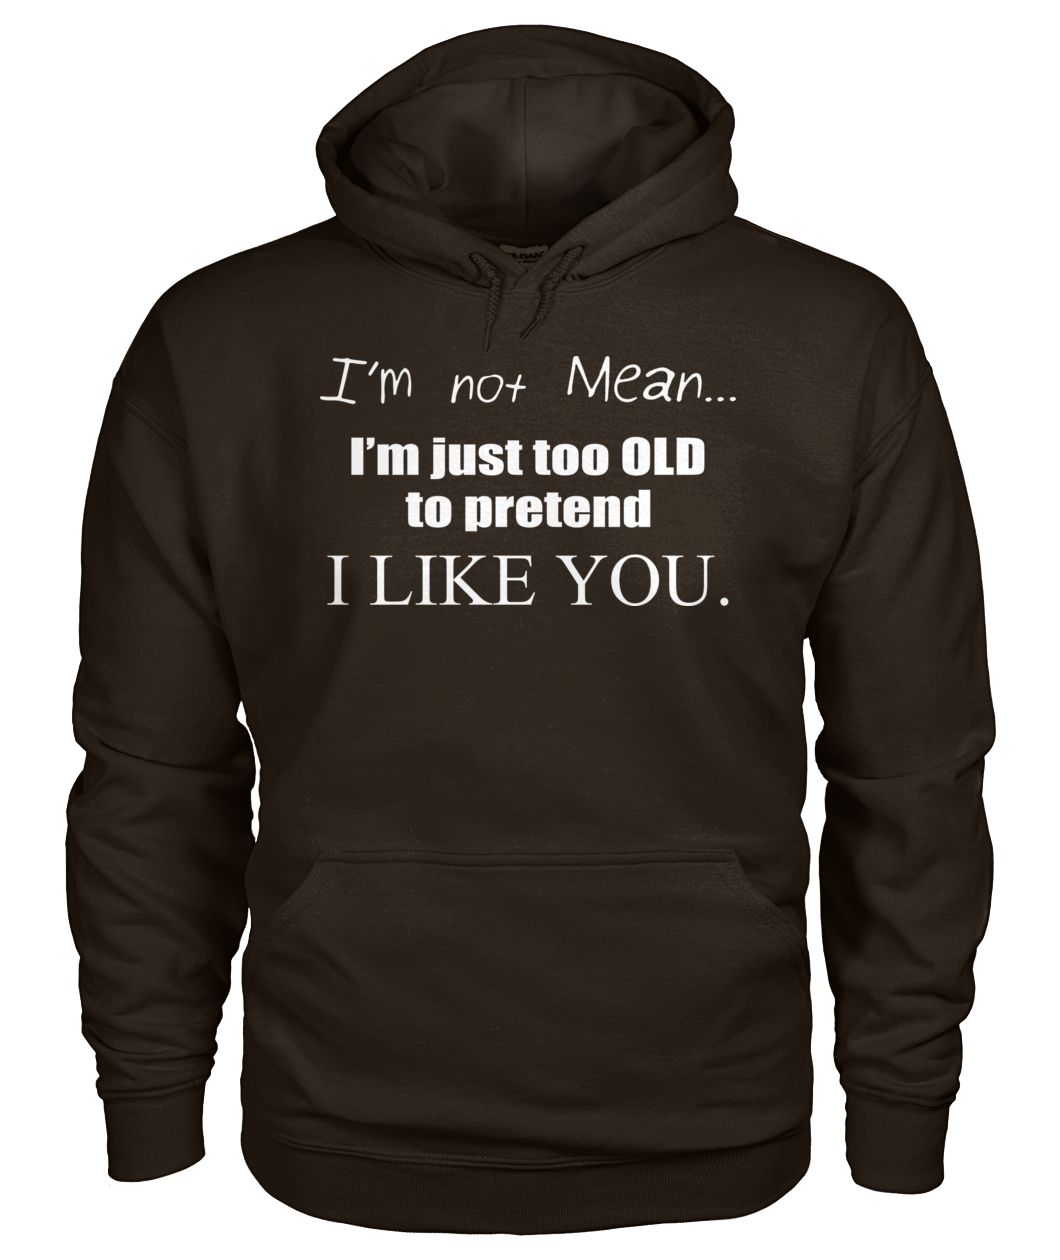 I'm not mean I'm just too old to pretend I like you gildan hoodie